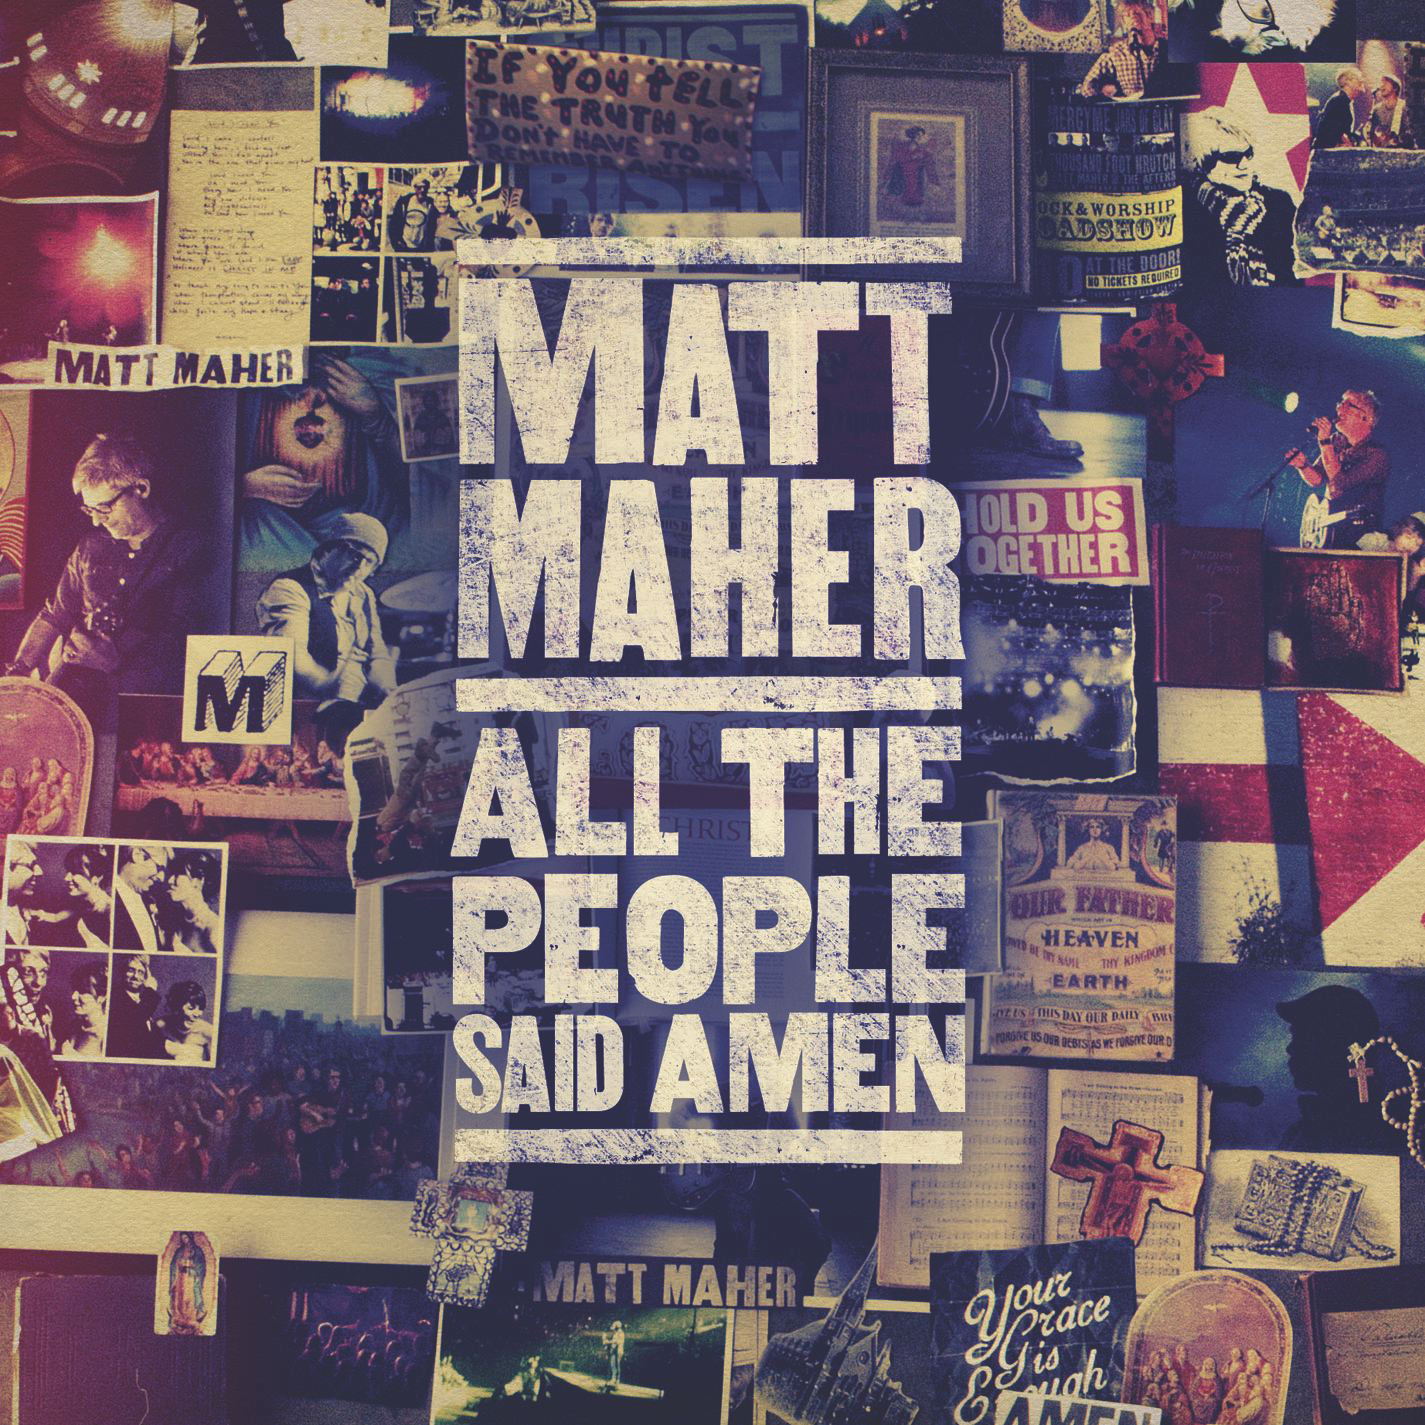 Matt Maher, "All The People Said Amen" Review